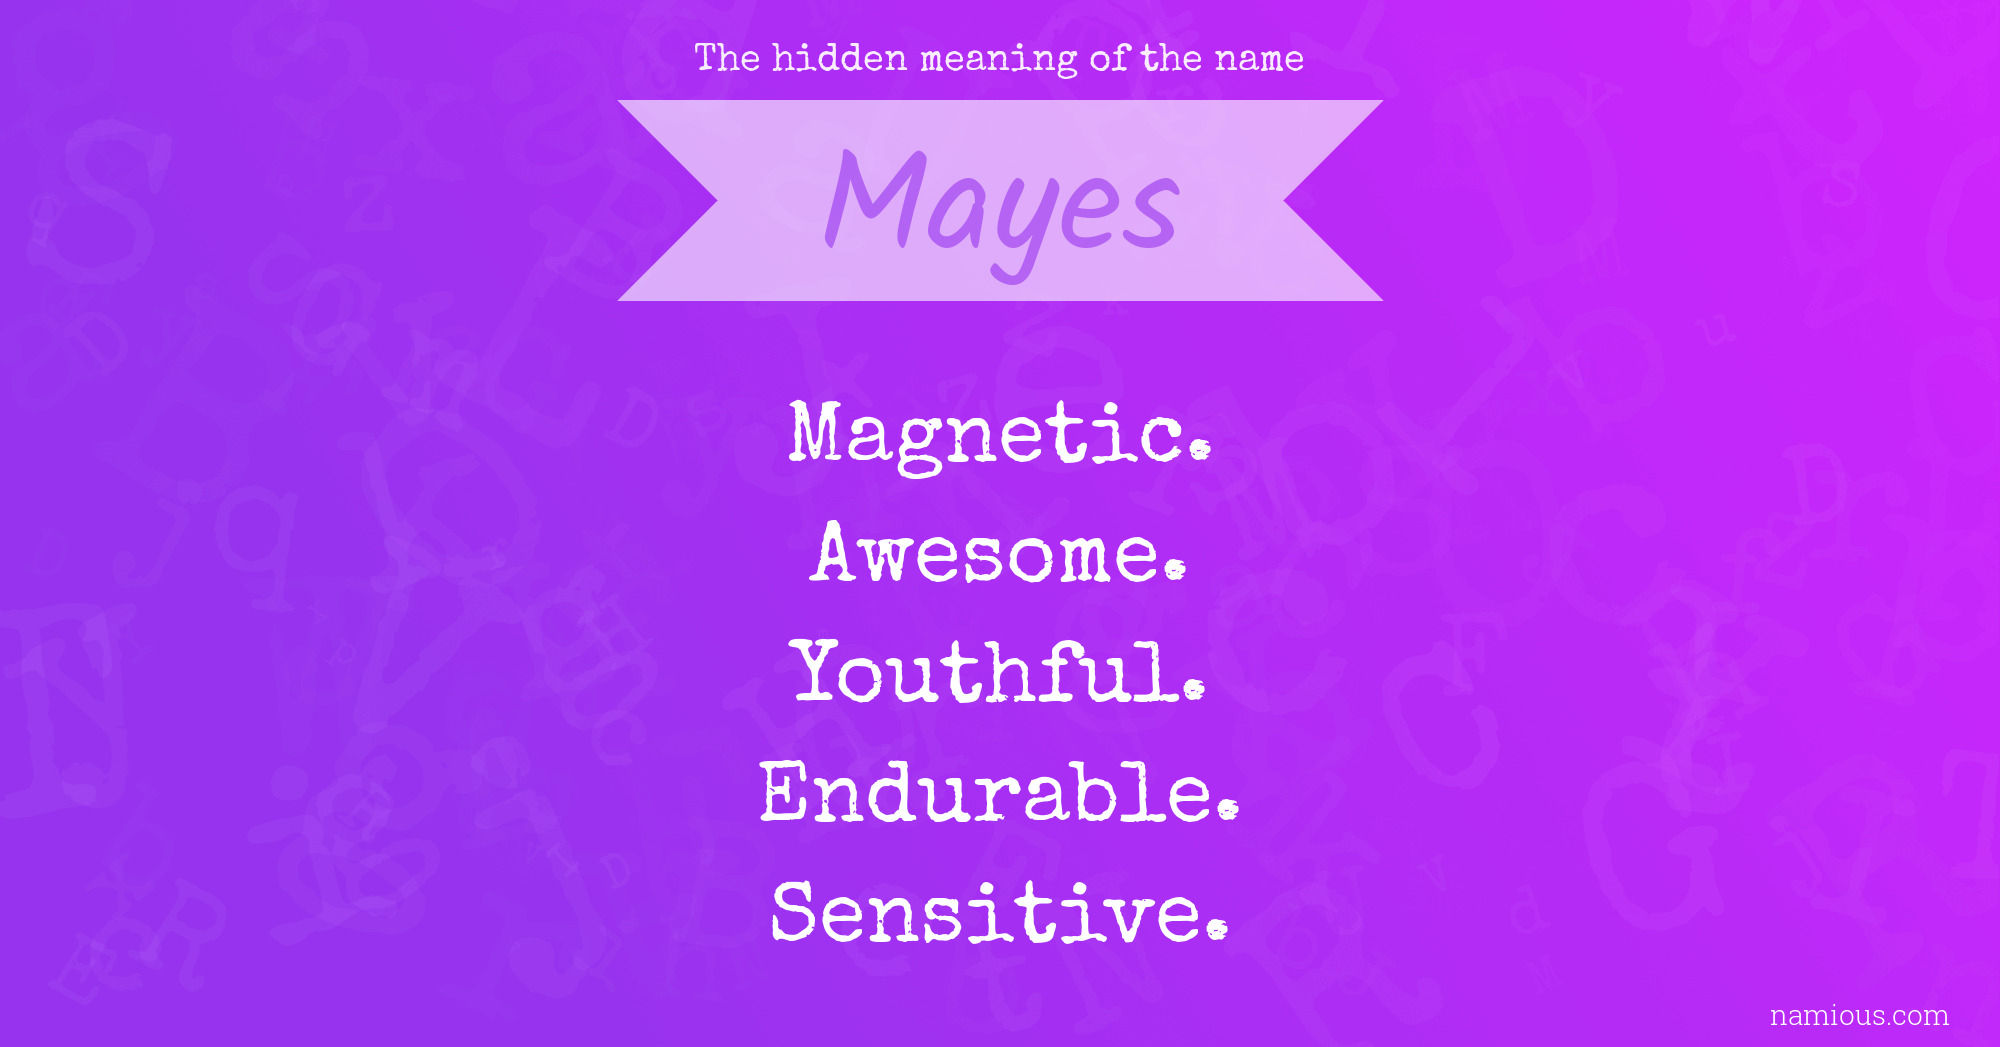 The hidden meaning of the name Mayes